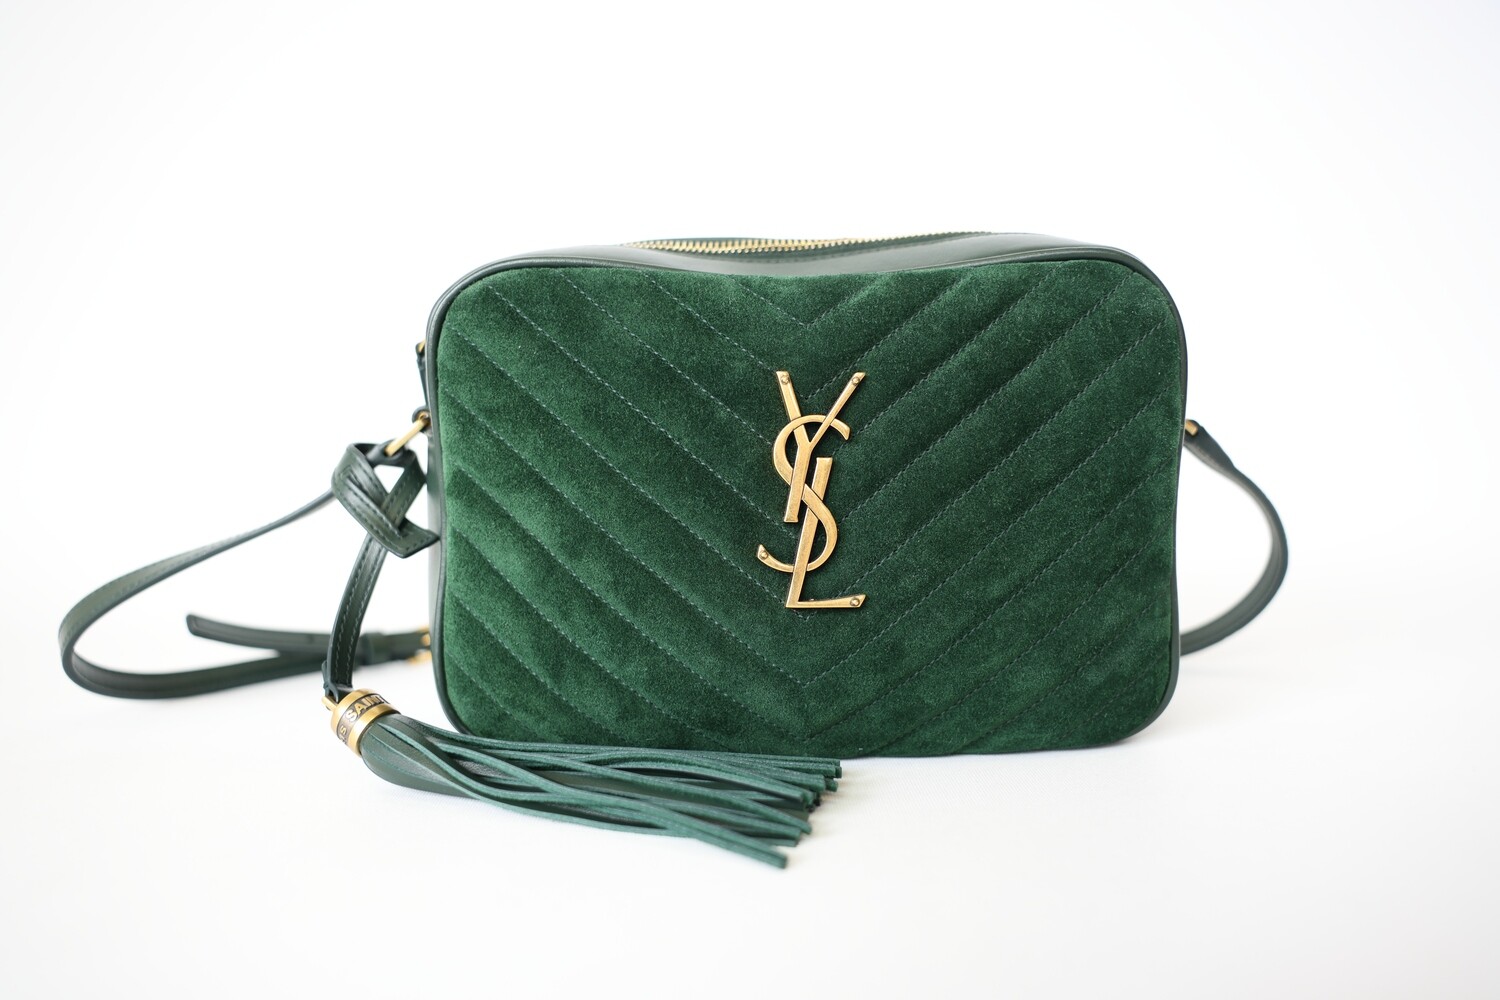 Saint Laurent Lou Camera Bag Emerald Green Leather And Suede With Gold Hardware, Preowned No Dustbag WA001